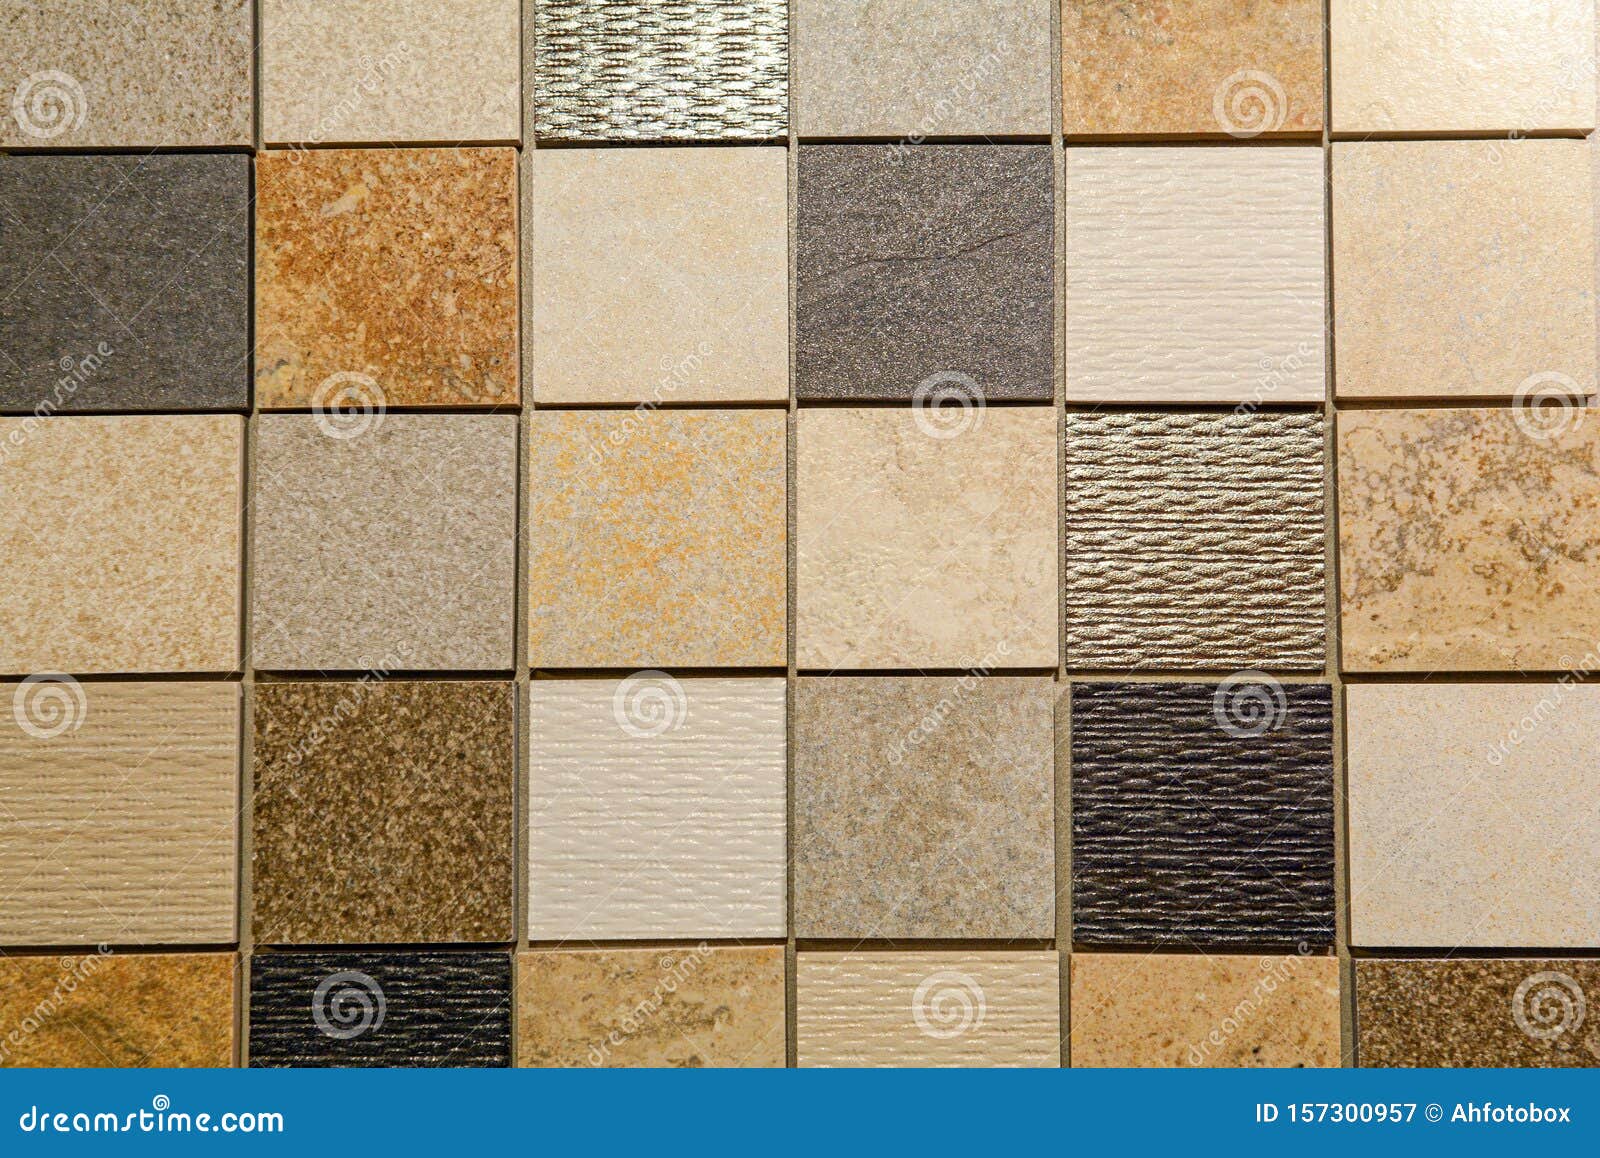 Material Pattern With Tiles And Natural Stone For Bathroom And